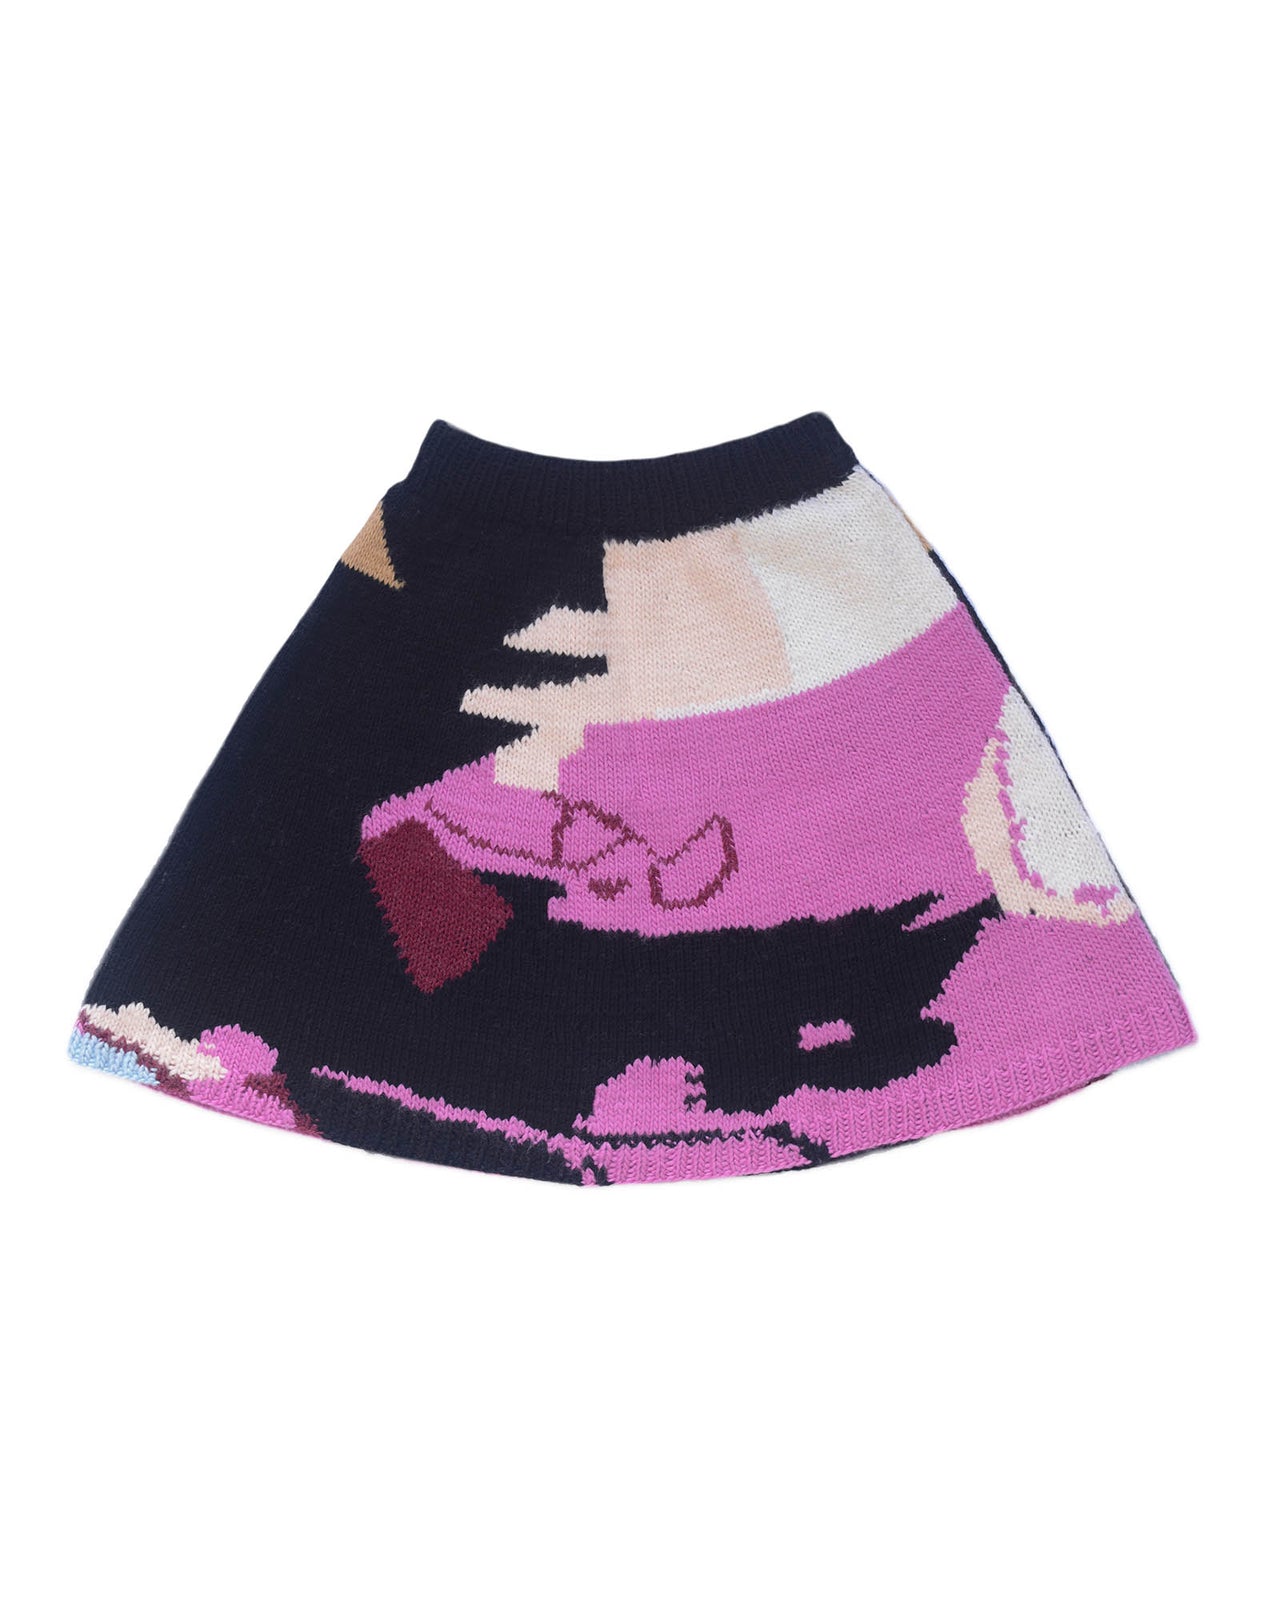 Wool skirt laid flat on white background. The skirt has abstract colour block patterns in fuchsia, black, white, beige and a touch of burgundy.